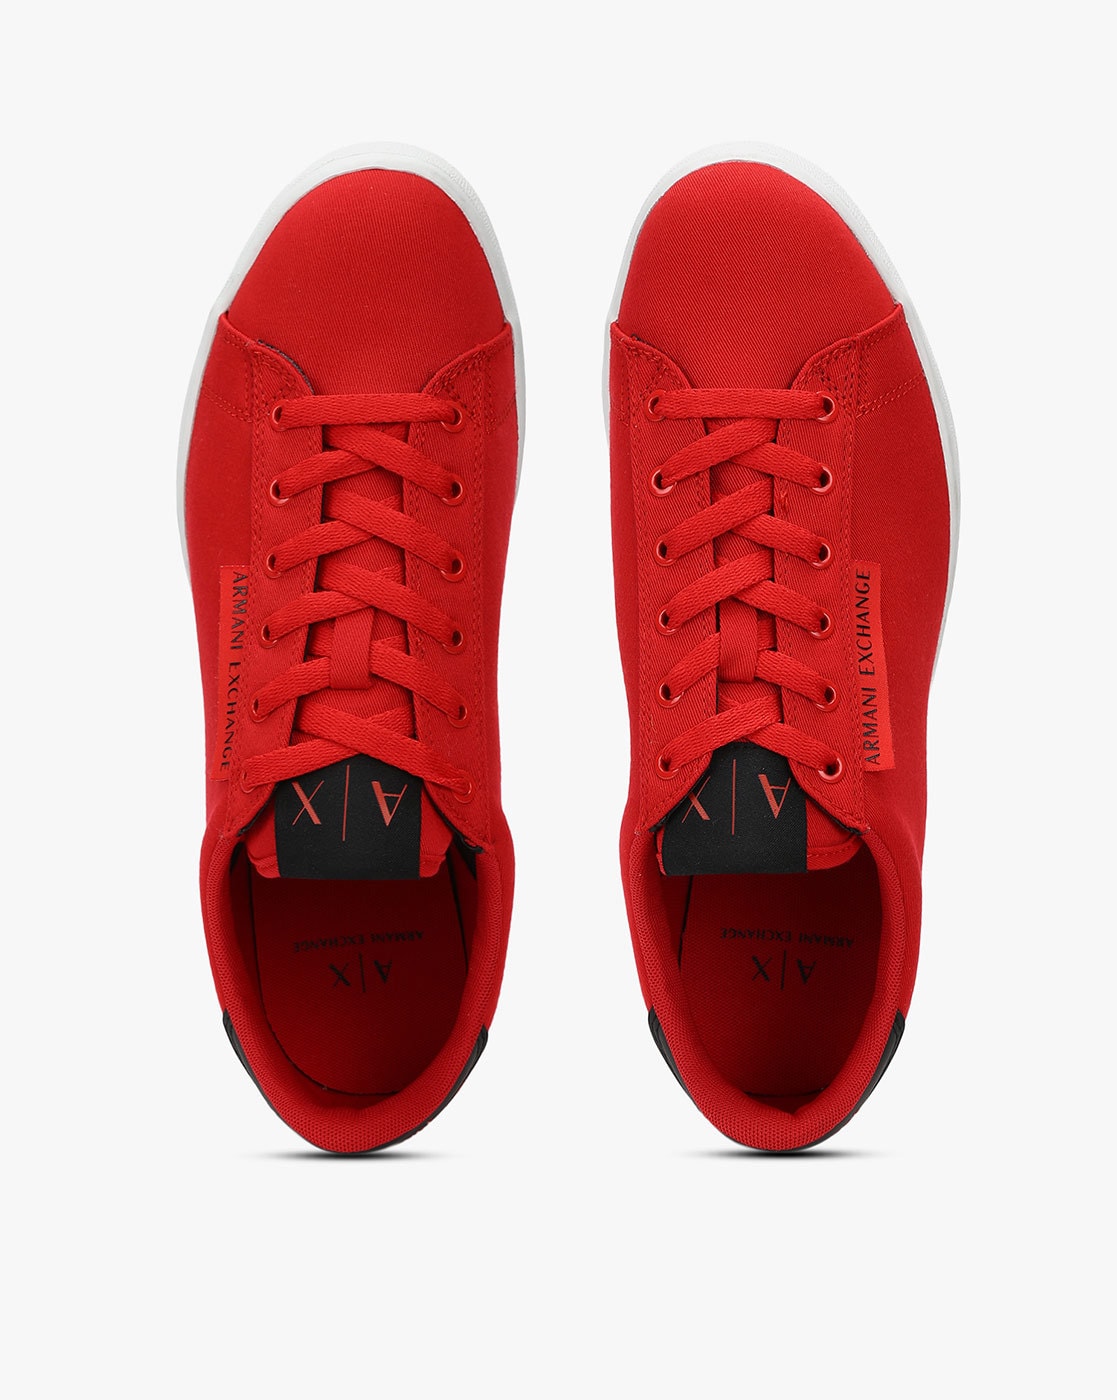 armani exchange red shoes